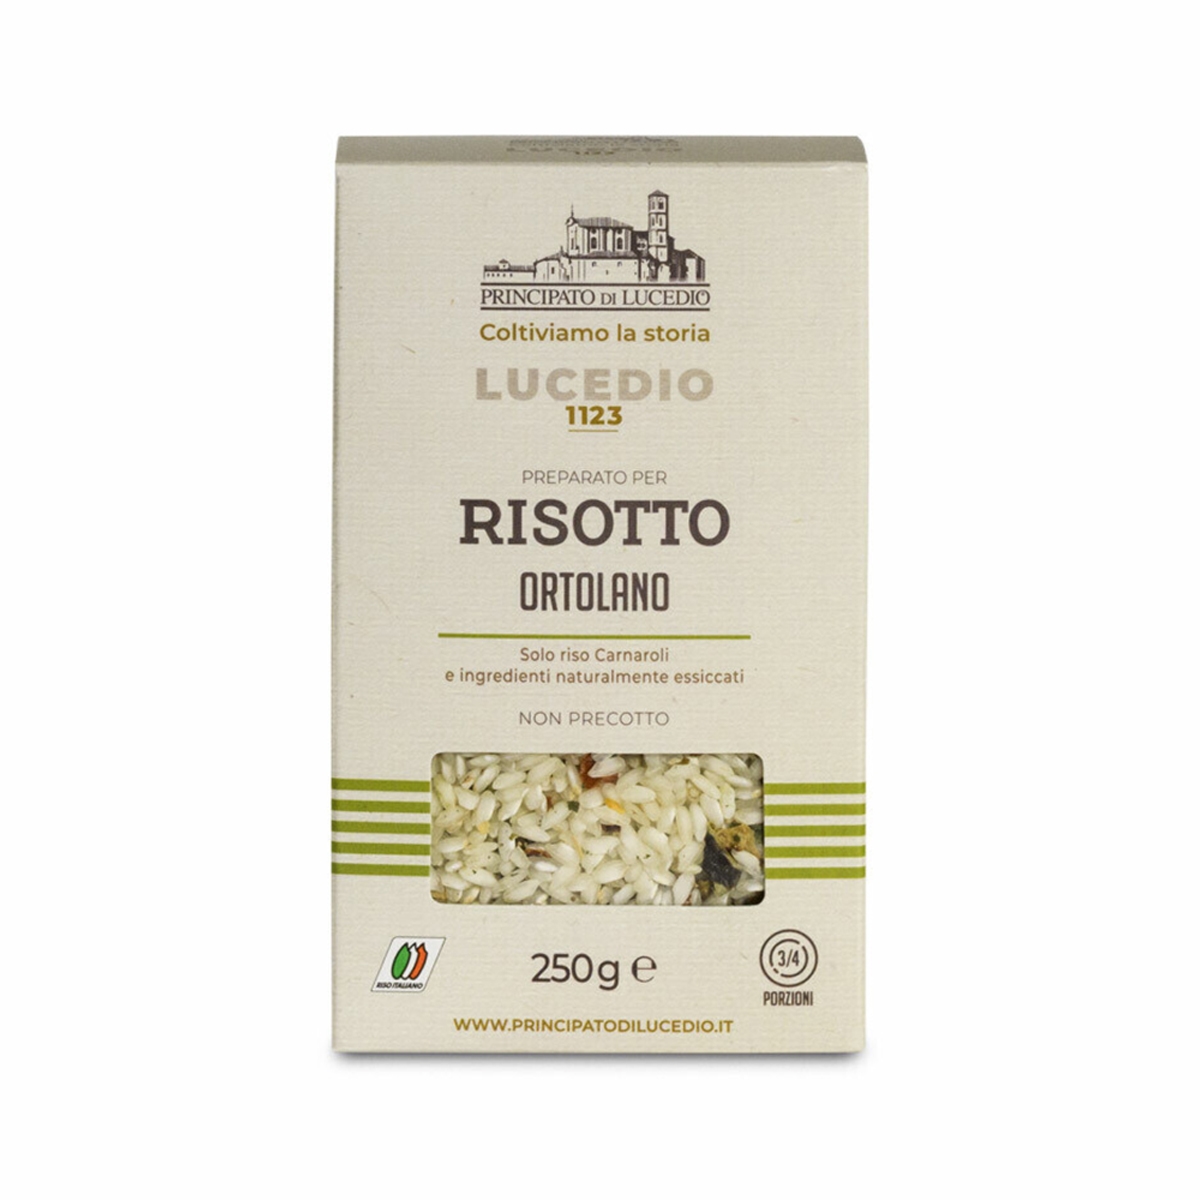 Ortolano Risotto - 250 g - Packaged in a protective atmosphere